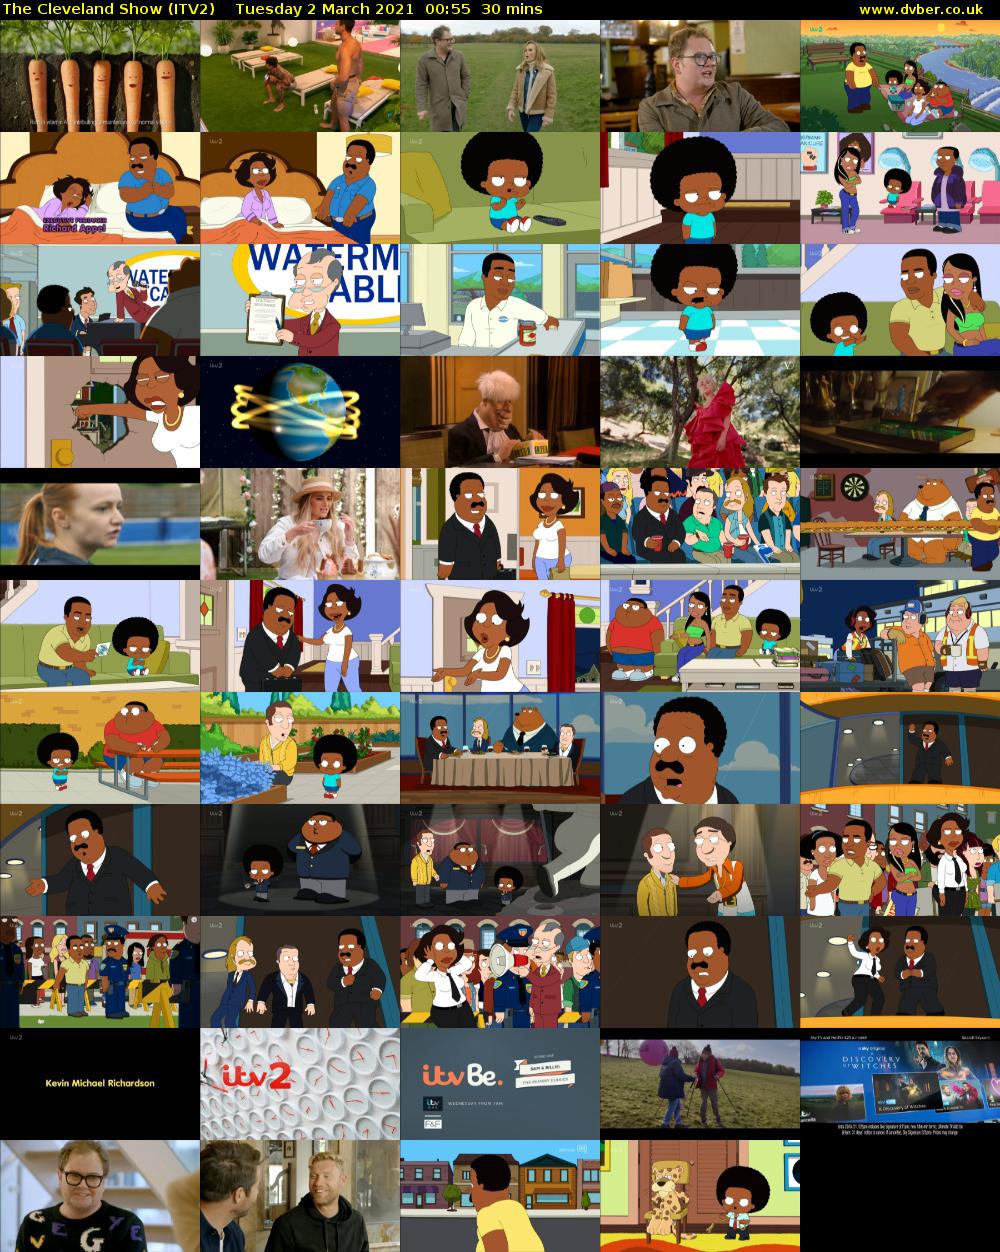 The Cleveland Show (ITV2) Tuesday 2 March 2021 00:55 - 01:25